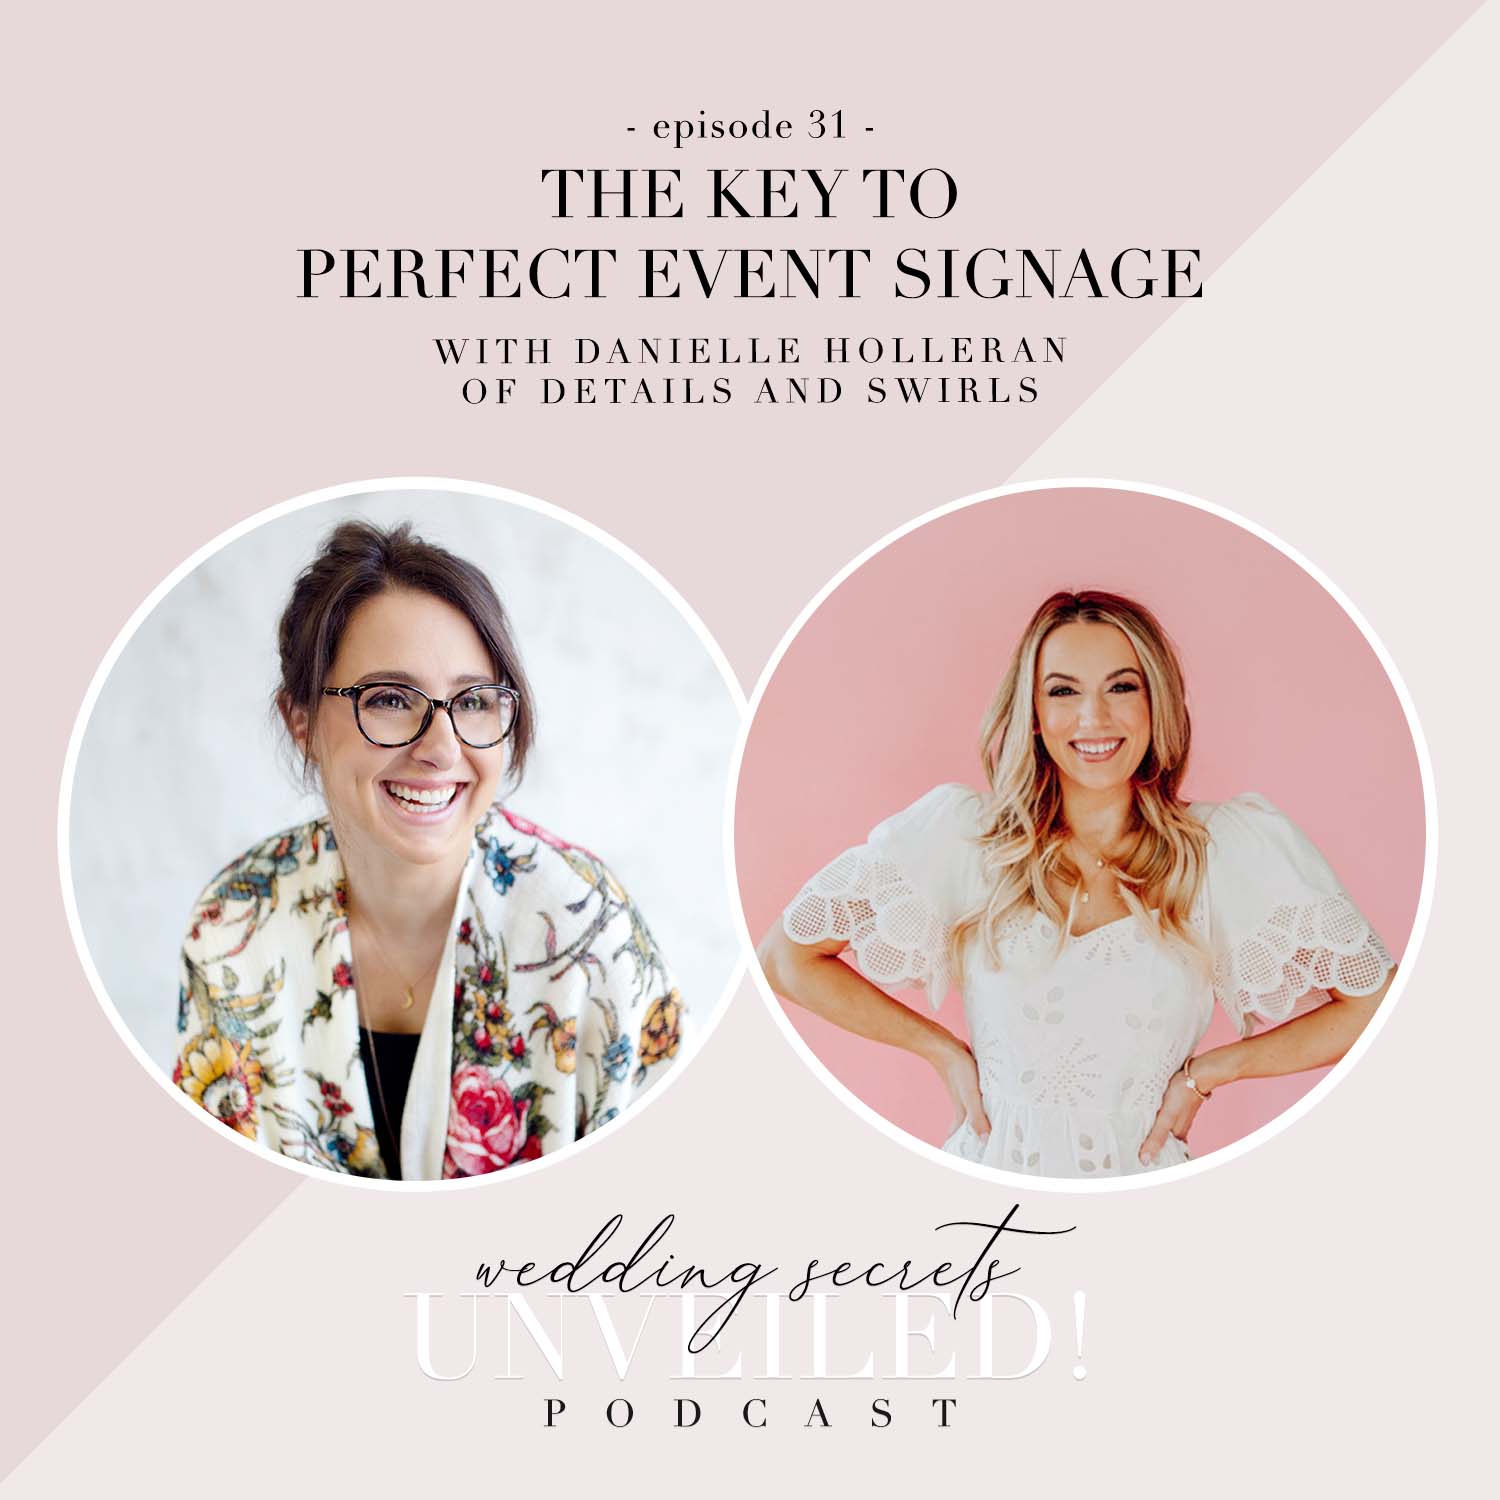 The Key to Perfect Event Signage: an Interview with Danielle Holleran of Details and Swirls on Wedding Secrets Unveiled! Podcast